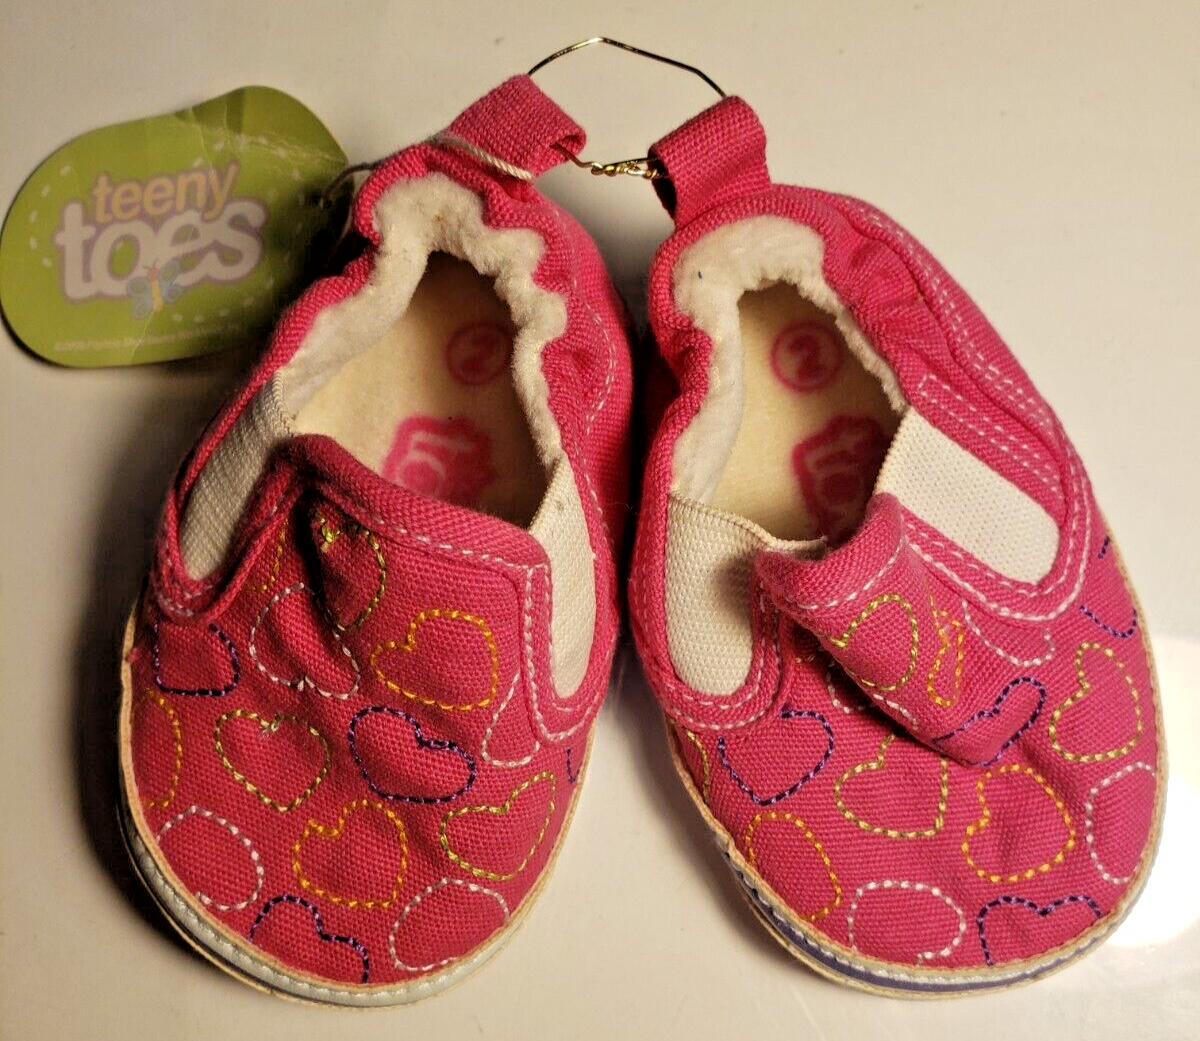 TEENY TOES INFANT BABY SHOES SLIP ON - PINK HEARTS - SIZE 2 - $10.99